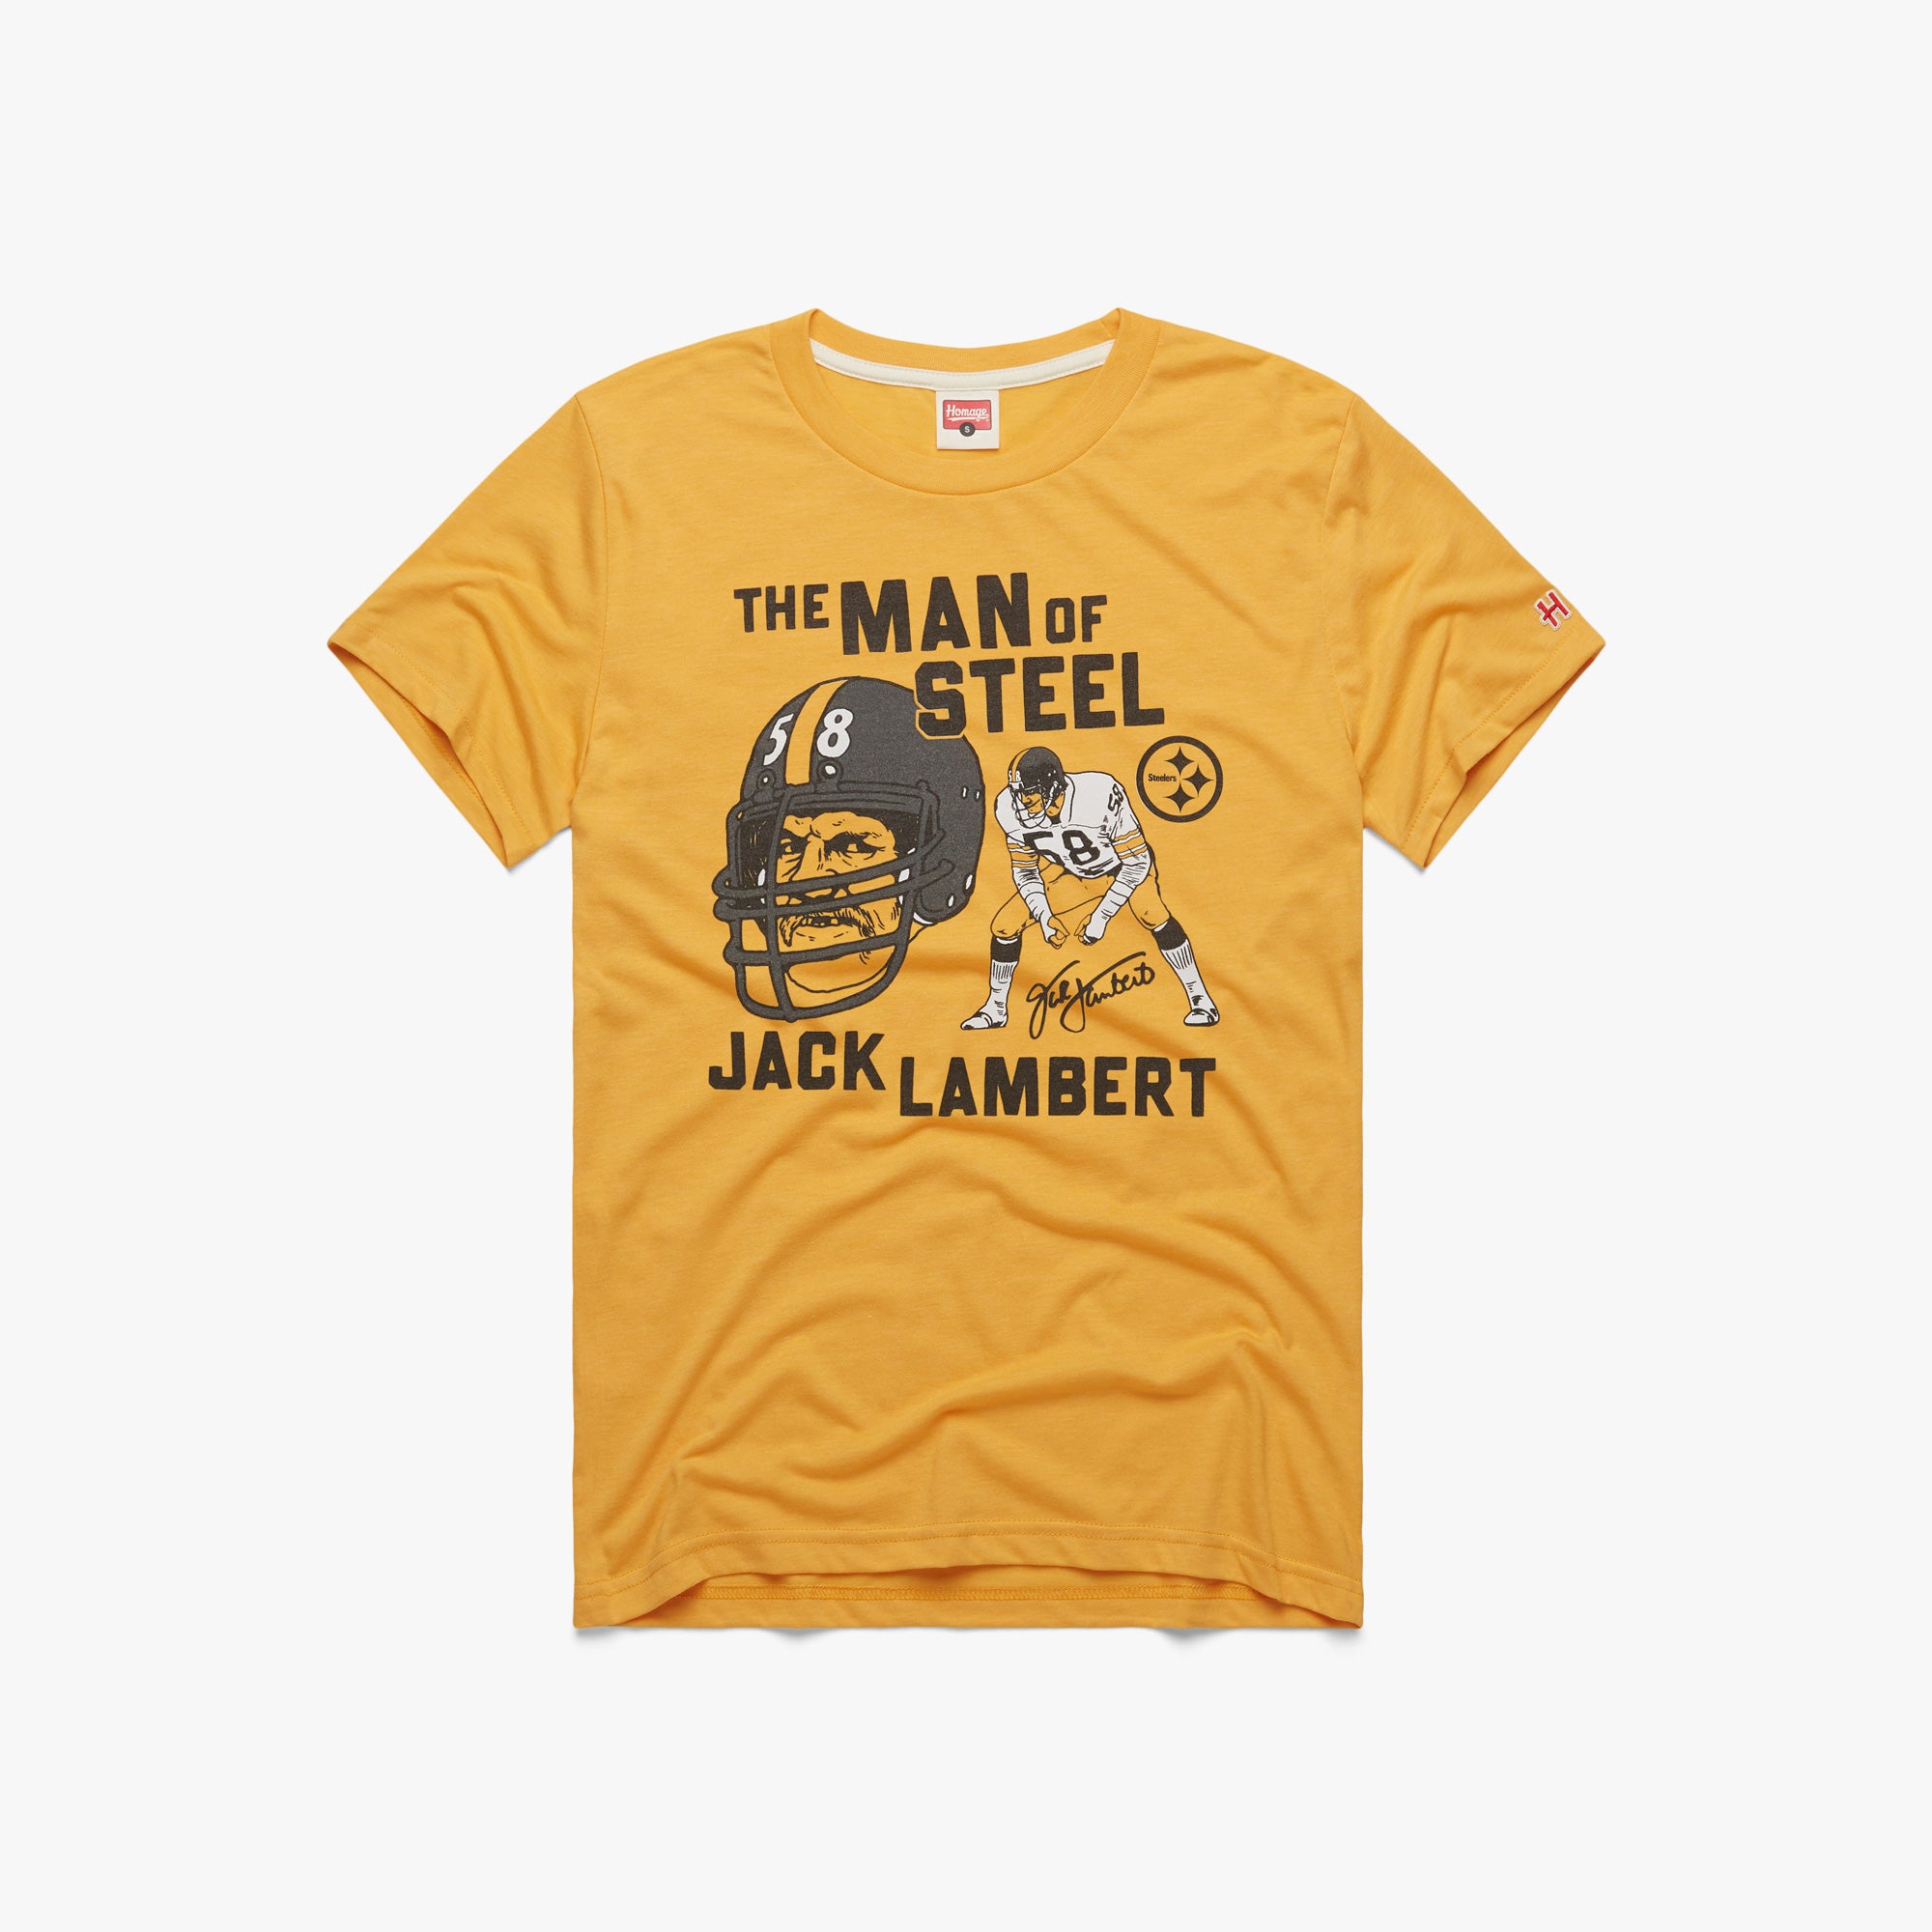 Pittsburgh Steelers Jack Lambert Signature T-Shirt from Homage. | Officially Licensed Vintage NFL Apparel from Homage Pro Shop.